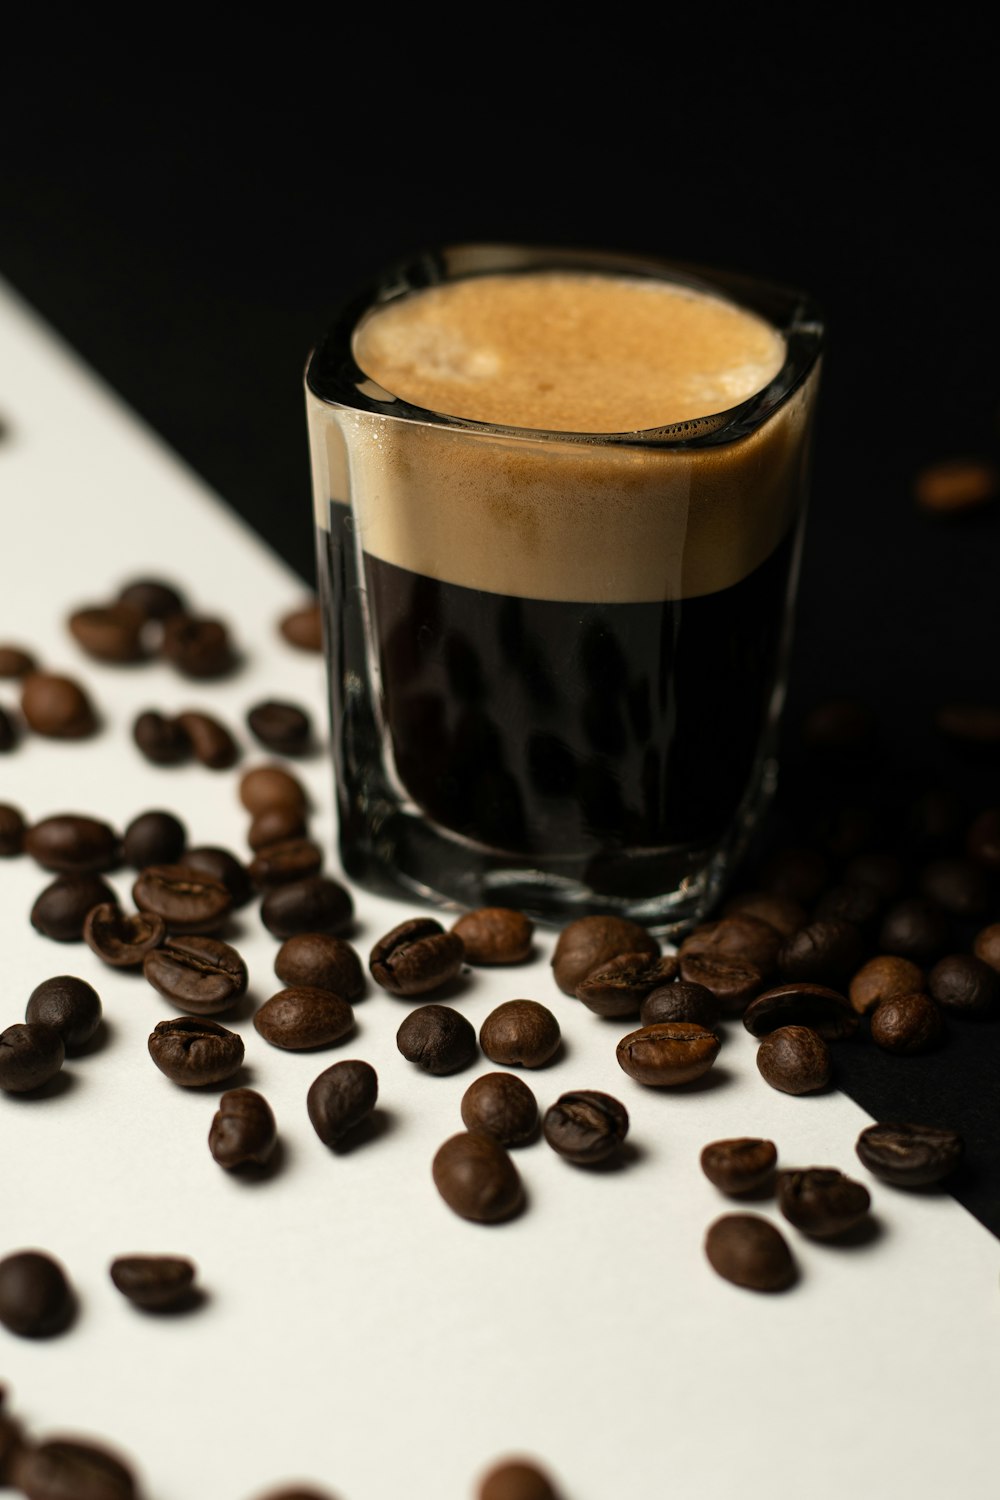 a shot glass filled with liquid surrounded by coffee beans